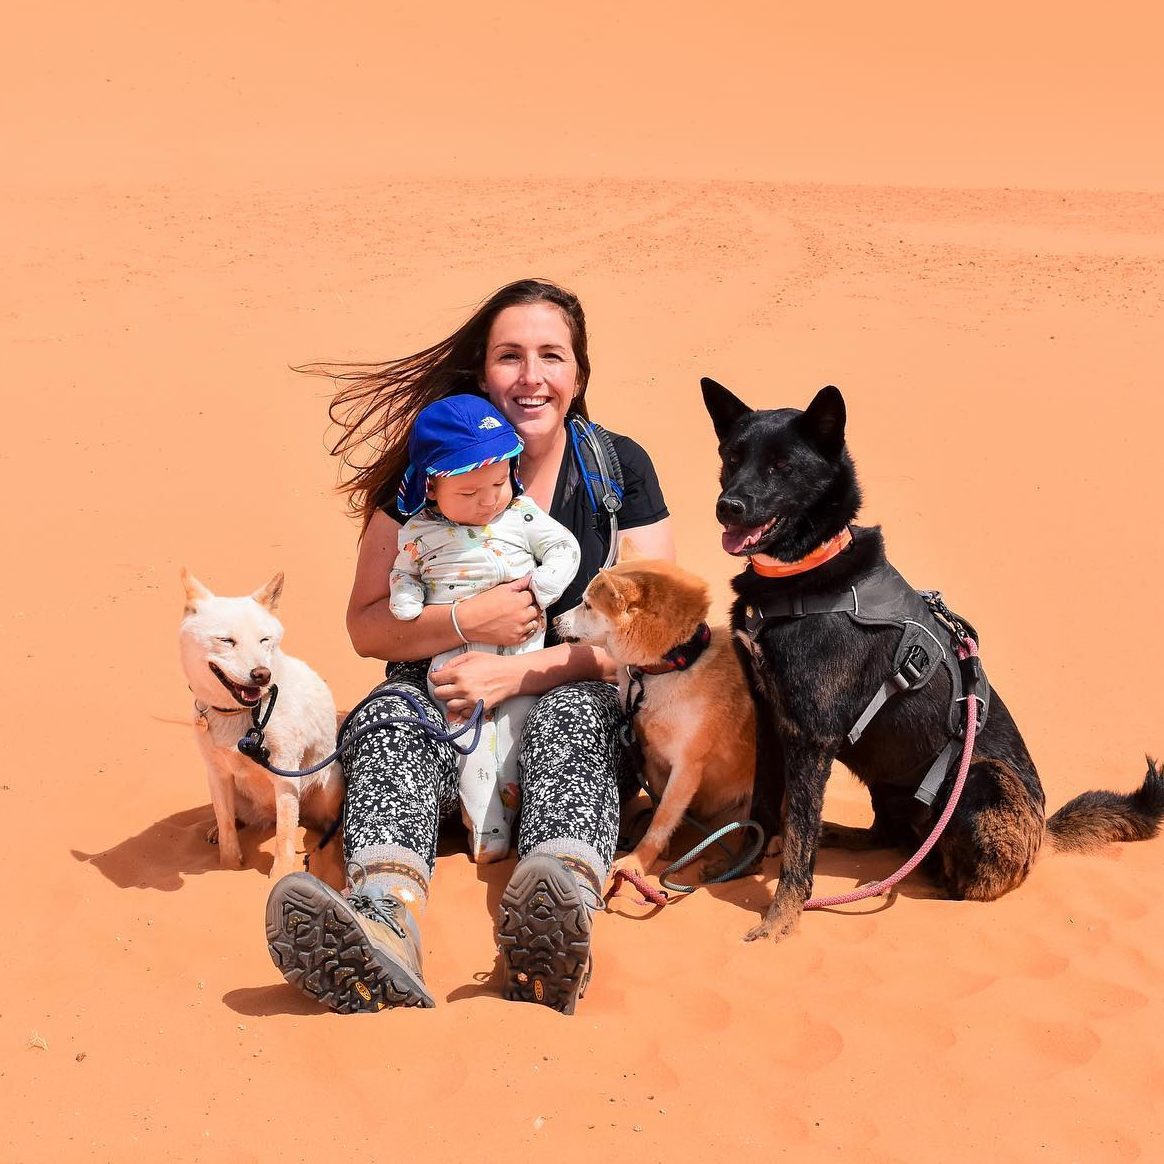 woman holding a baby with three dogs beside them sitting on a pink sand dune